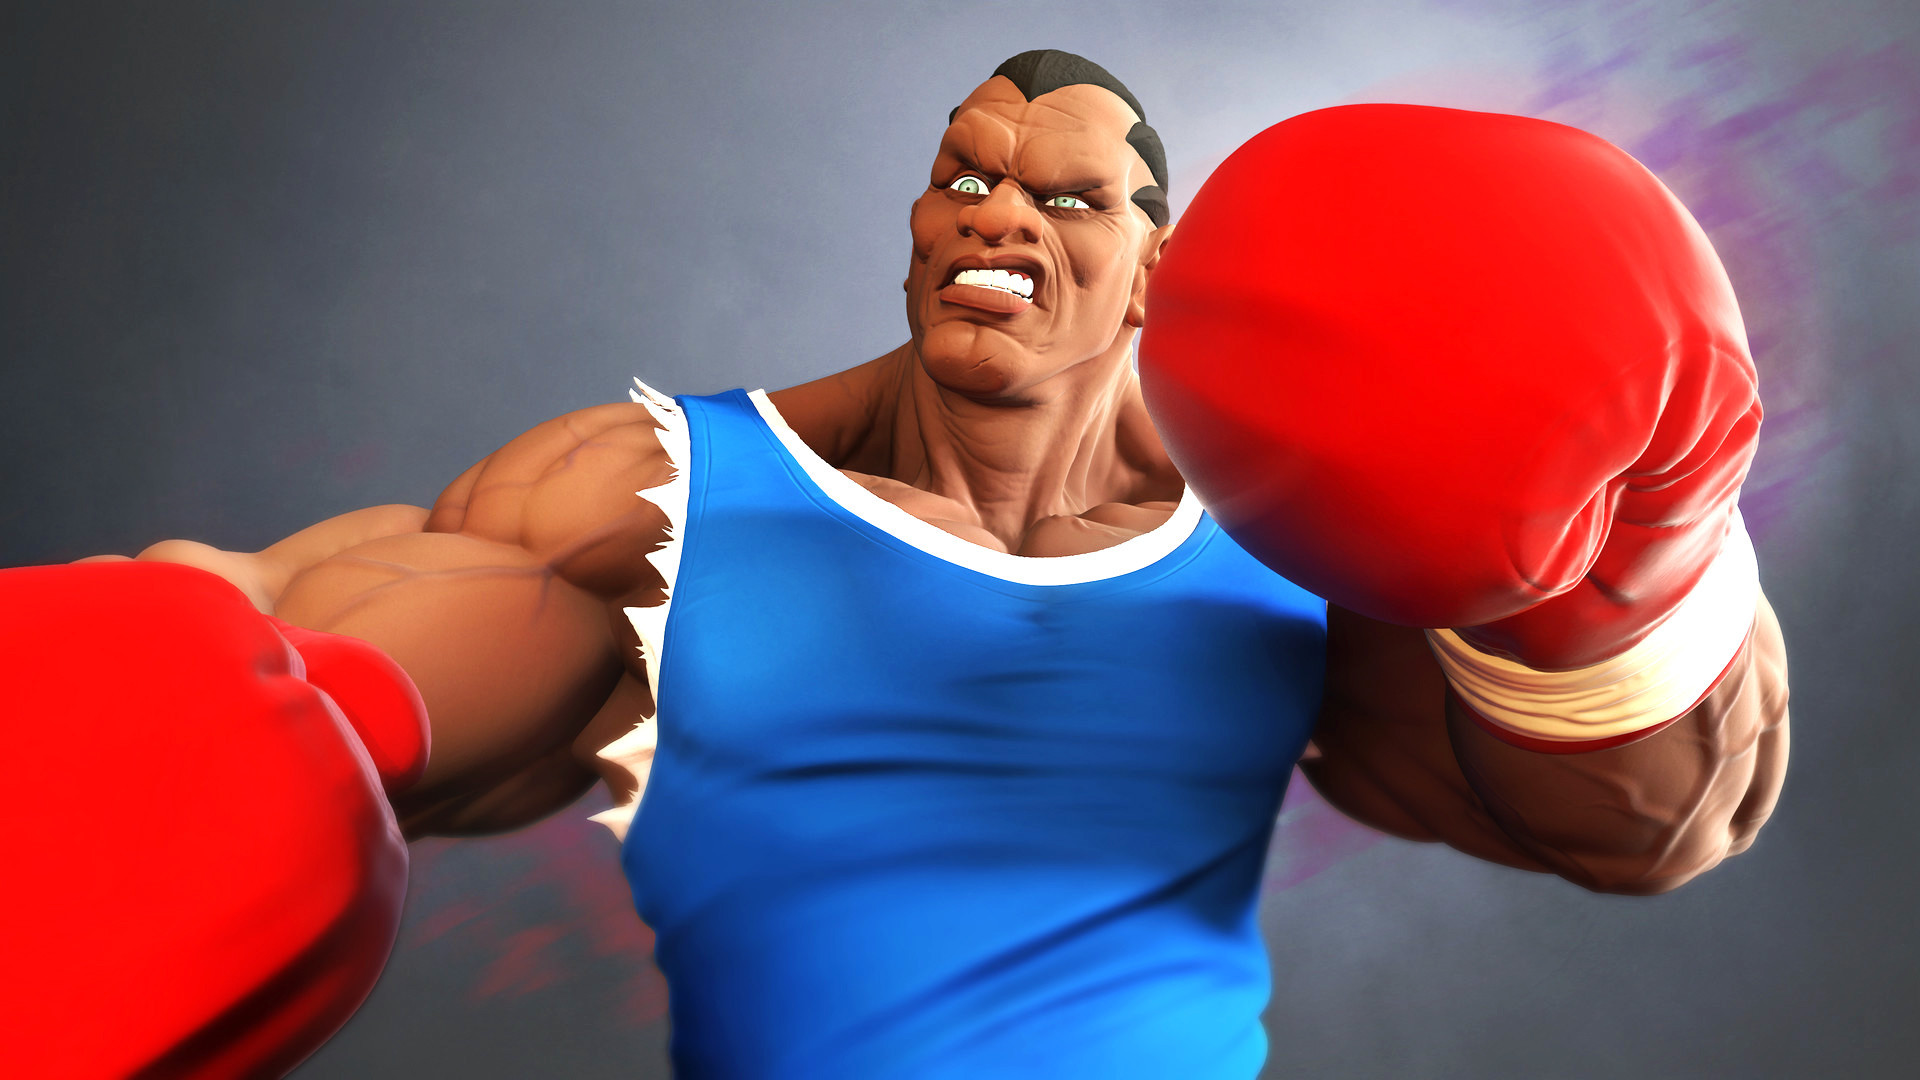 Street Fighter Bust - Professional Boxing , HD Wallpaper & Backgrounds